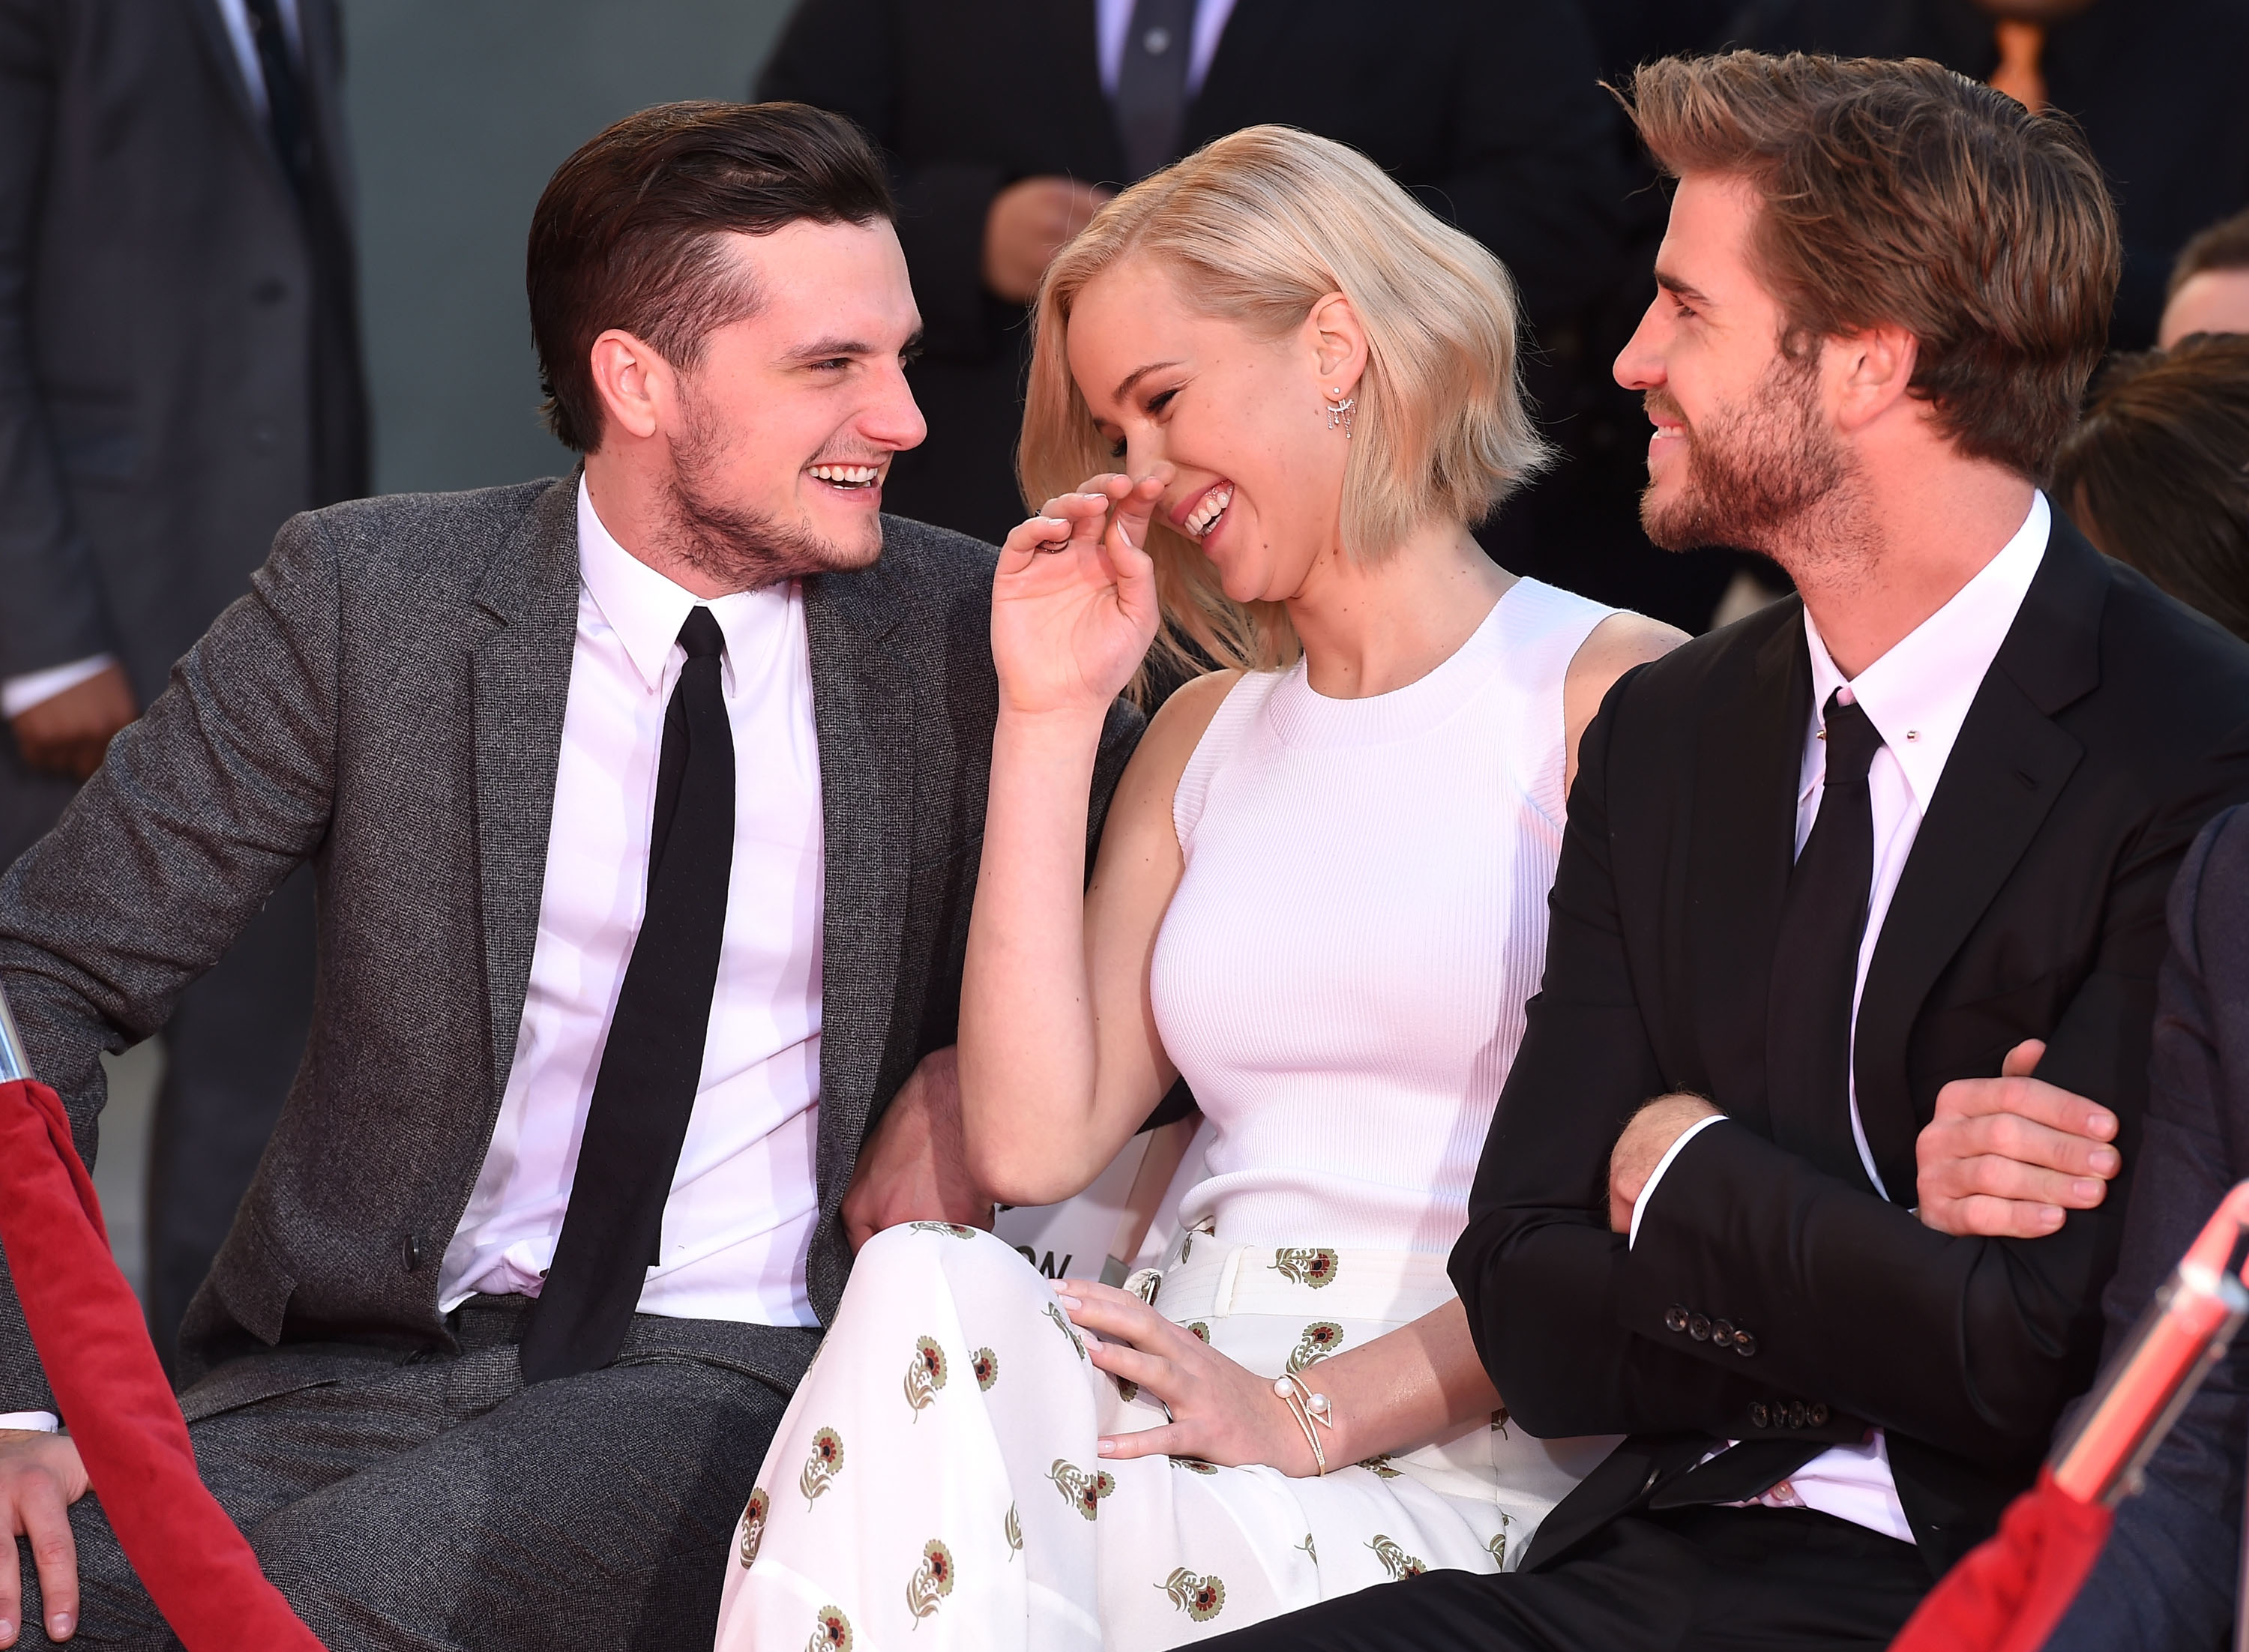 Josh and Jennifer laugh as Liam smiles and looks on